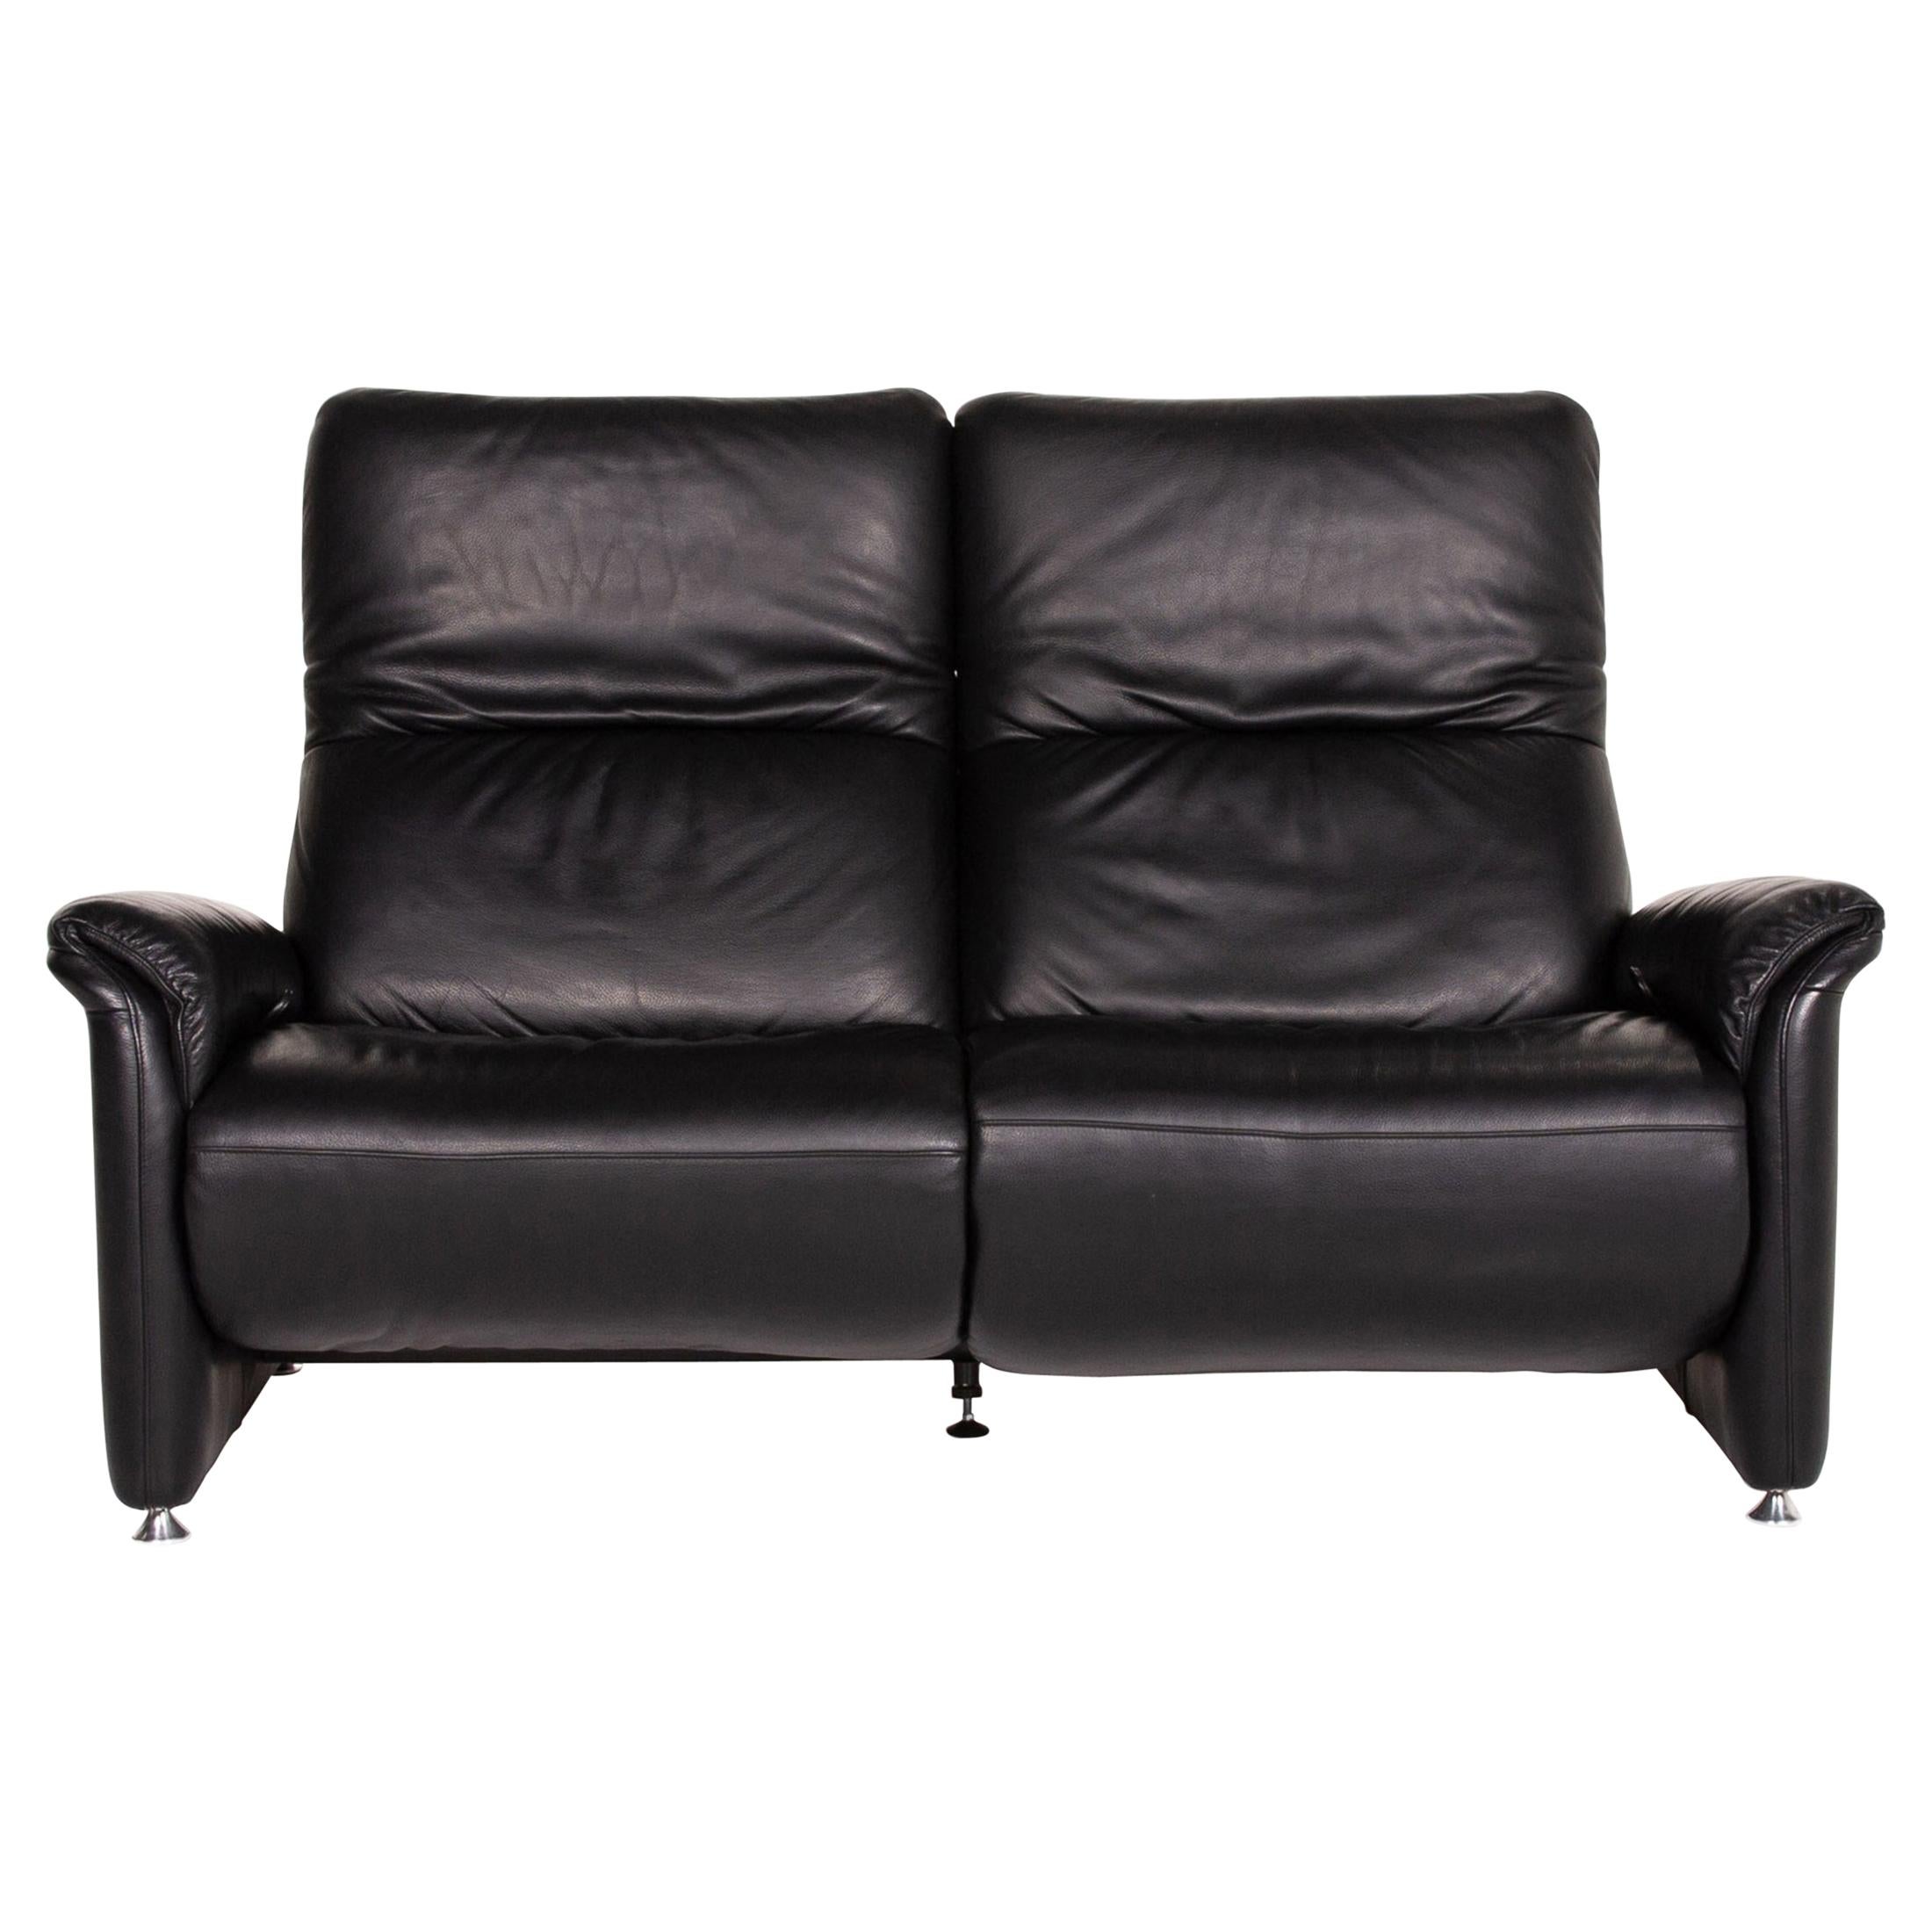 Willi Schillig Ergoline Leather Sofa Black Two-Seat Function Relax Function For Sale